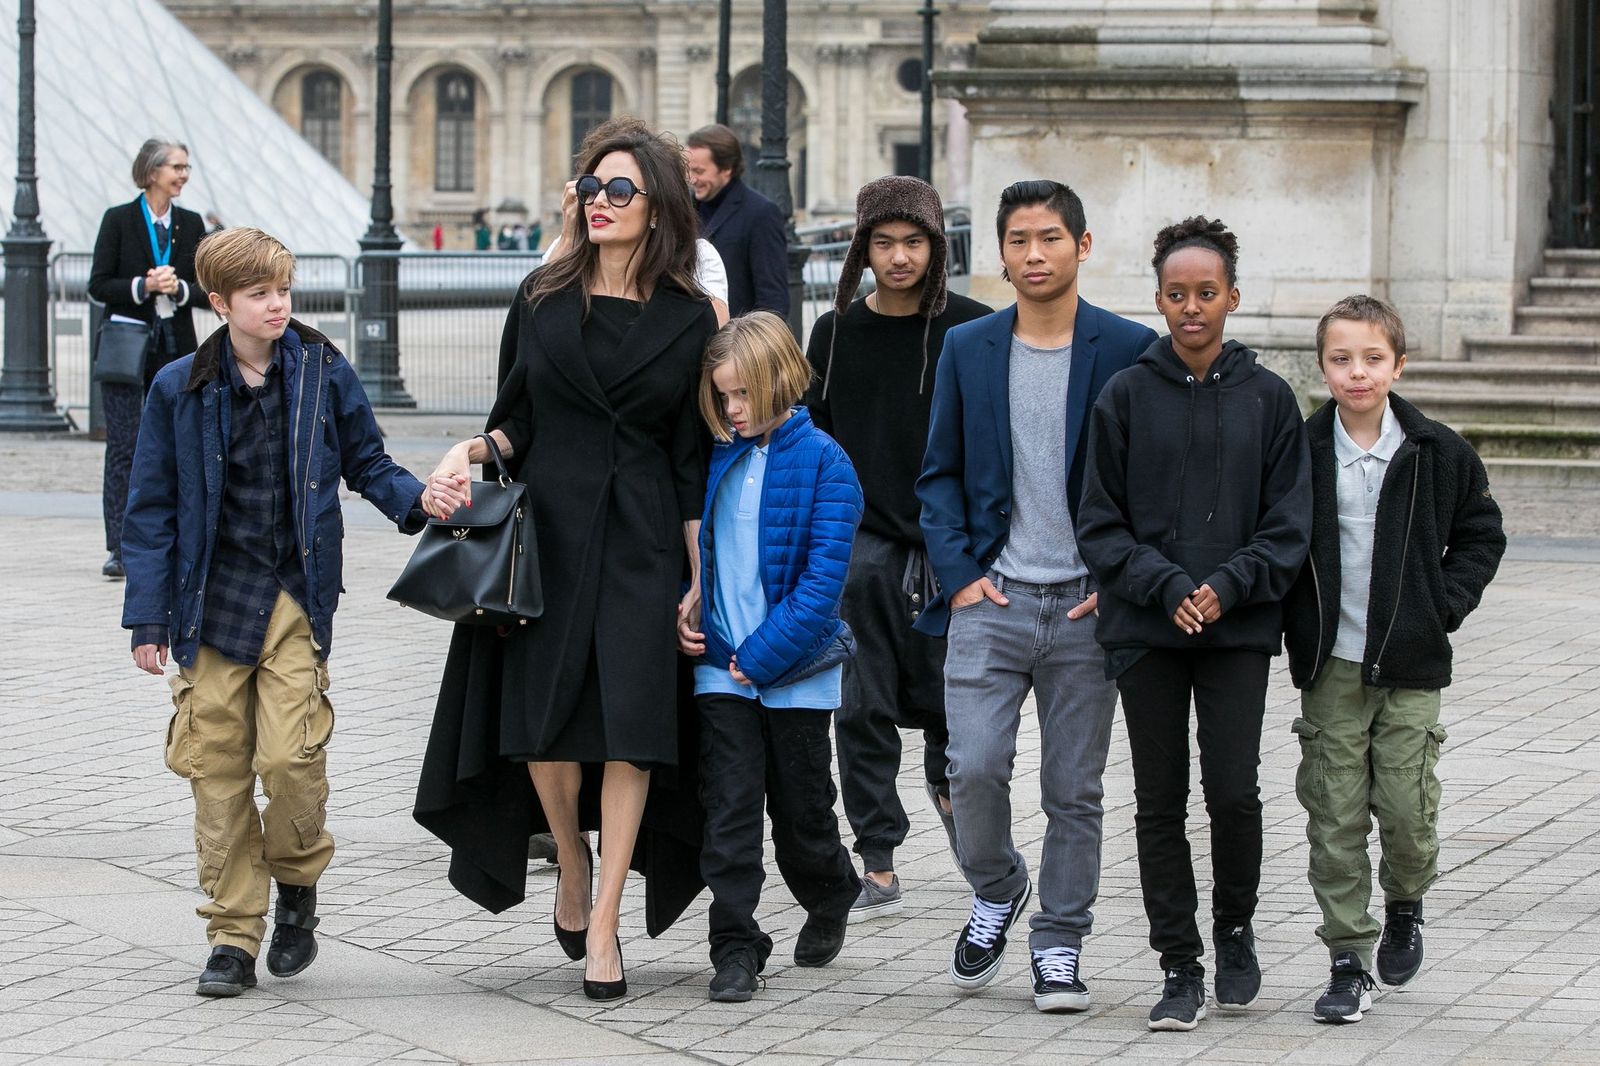 Angelina Jolie and her children Maddox, Shiloh, Vivienne, Knox, Zahara, and Pax Jolie-Pitt leaving the Louvre museum on January 30, 2018, in Paris, France | Photo: Marc Piasecki/GC Images/Getty Images